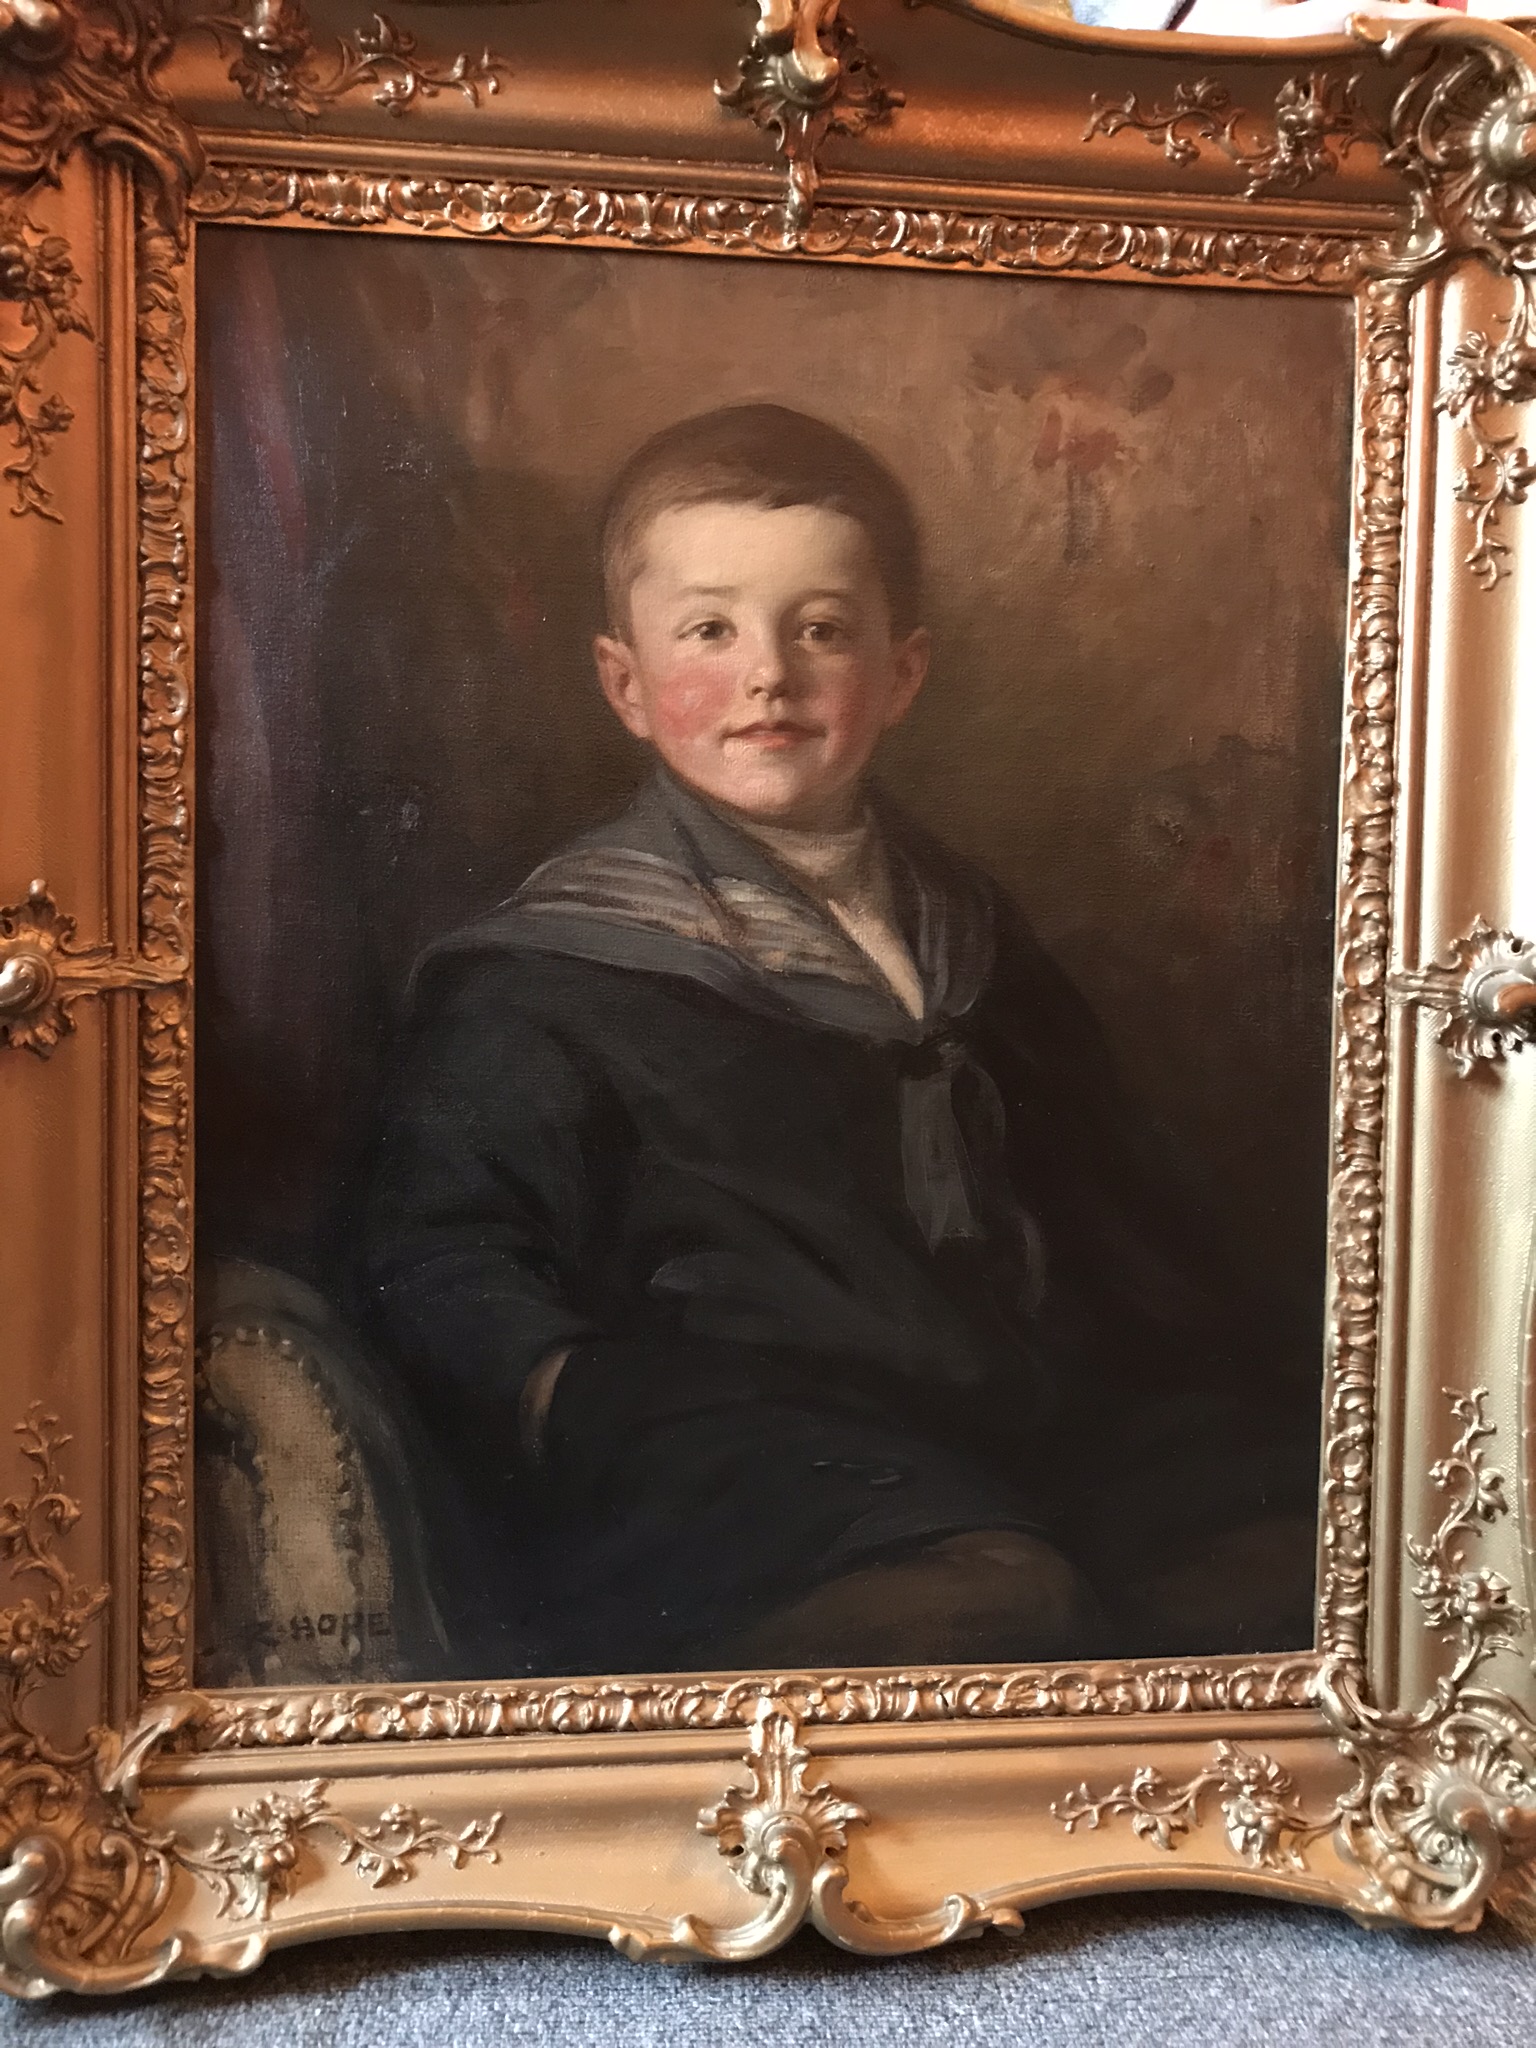 Portrait of a boy, by Scottish artist Robert Hope,1869-1936 exhib R.A, R.S.A, R.S.W - Image 5 of 5